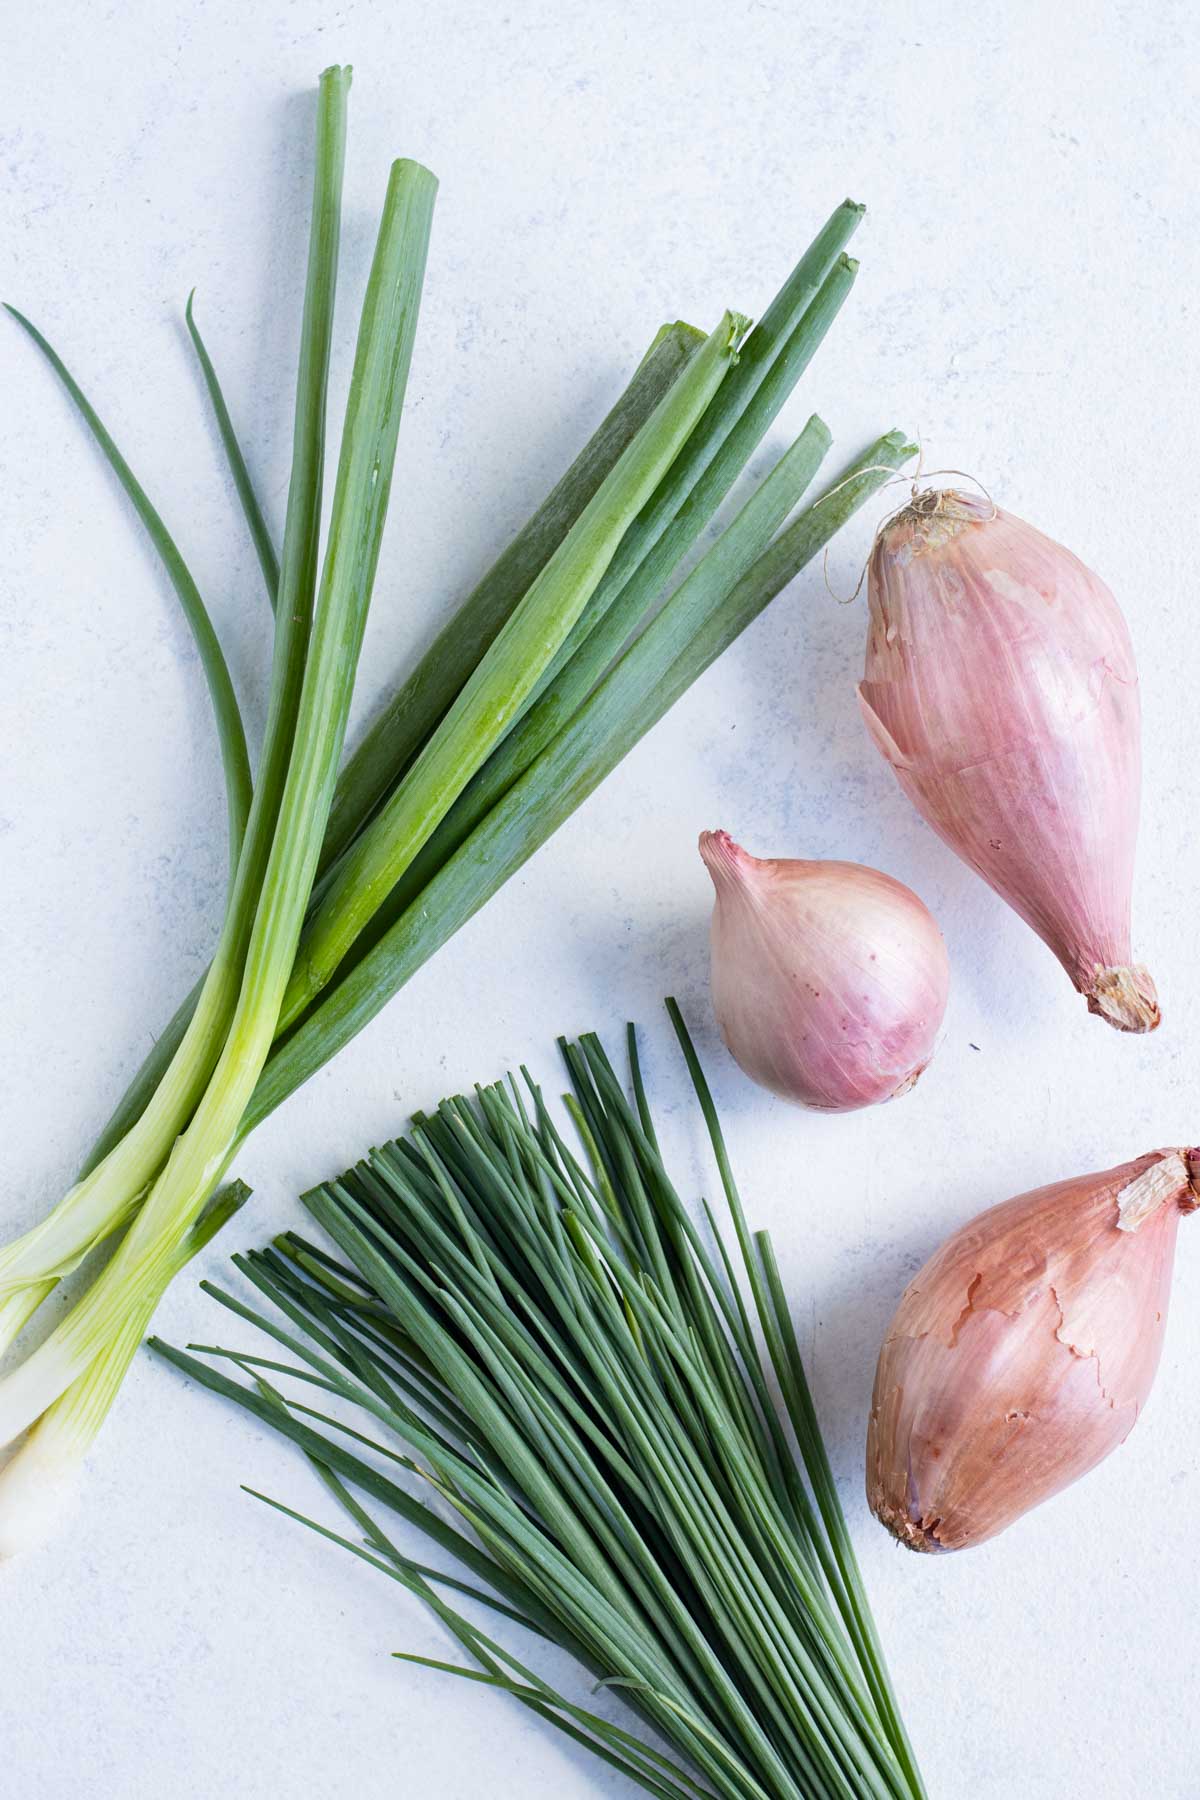 Shallots ! How Similar Are They to Onions & Garlic?